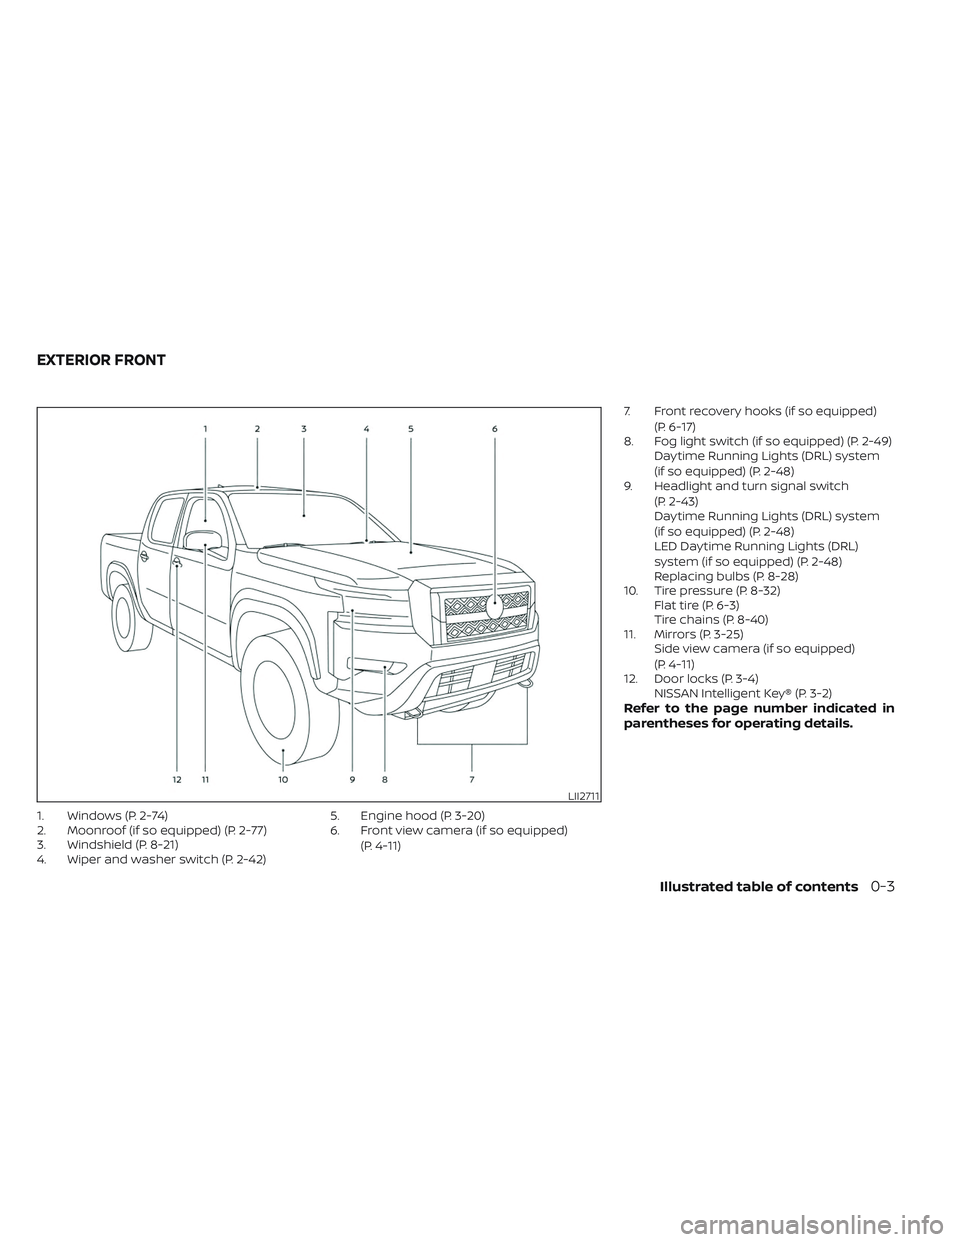 NISSAN FRONTIER 2023 User Guide 1. Windows (P. 2-74)
2. Moonroof (if so equipped) (P. 2-77)
3. Windshield (P. 8-21)
4. Wiper and washer switch (P. 2-42)5. Engine hood (P. 3-20)
6. Front view camera (if so equipped)
(P. 4-11) 7. Fron